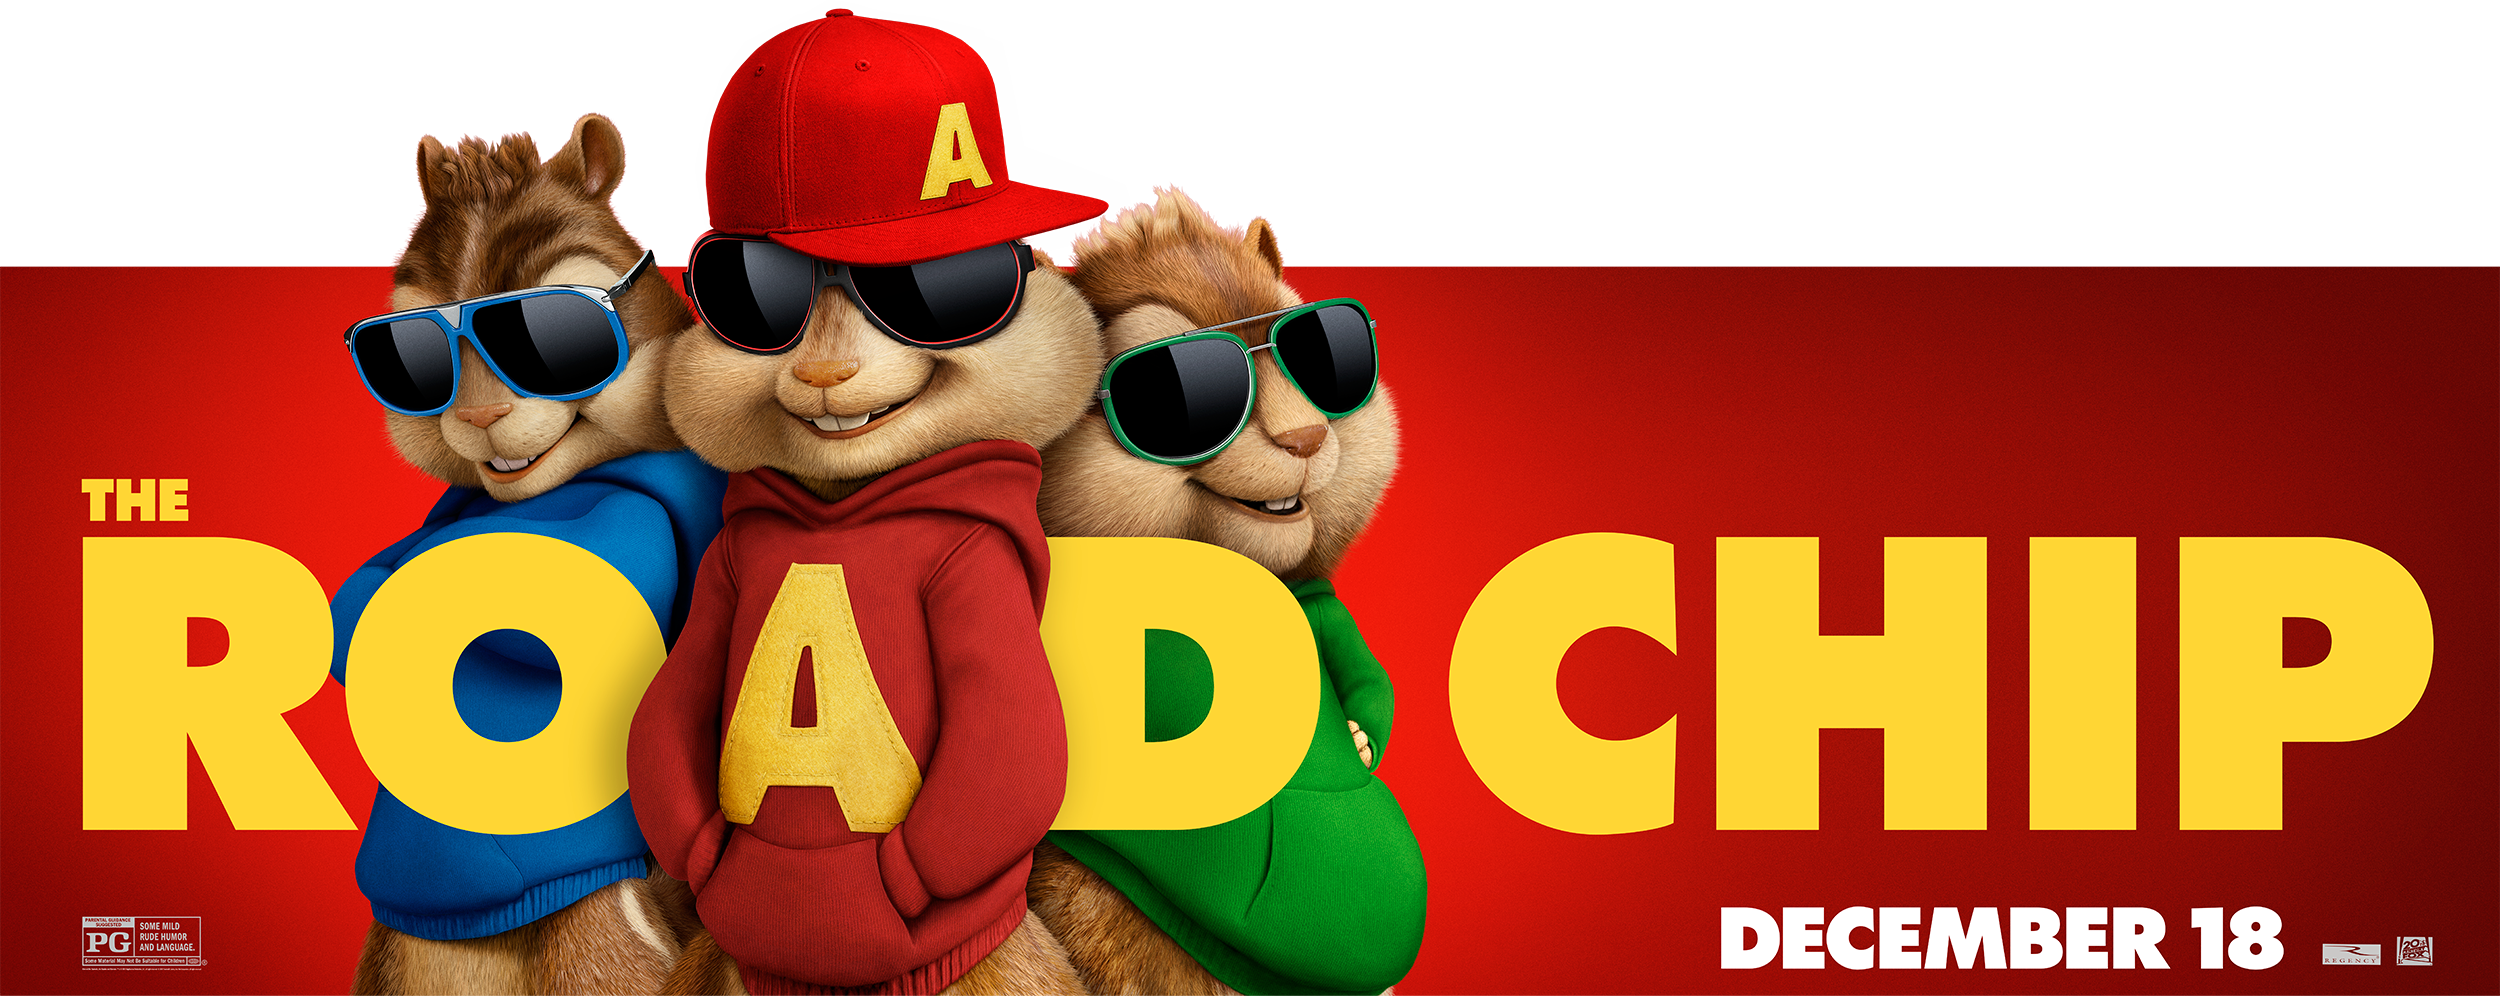 Alvin And The Chipmunks: The Road Chip #9